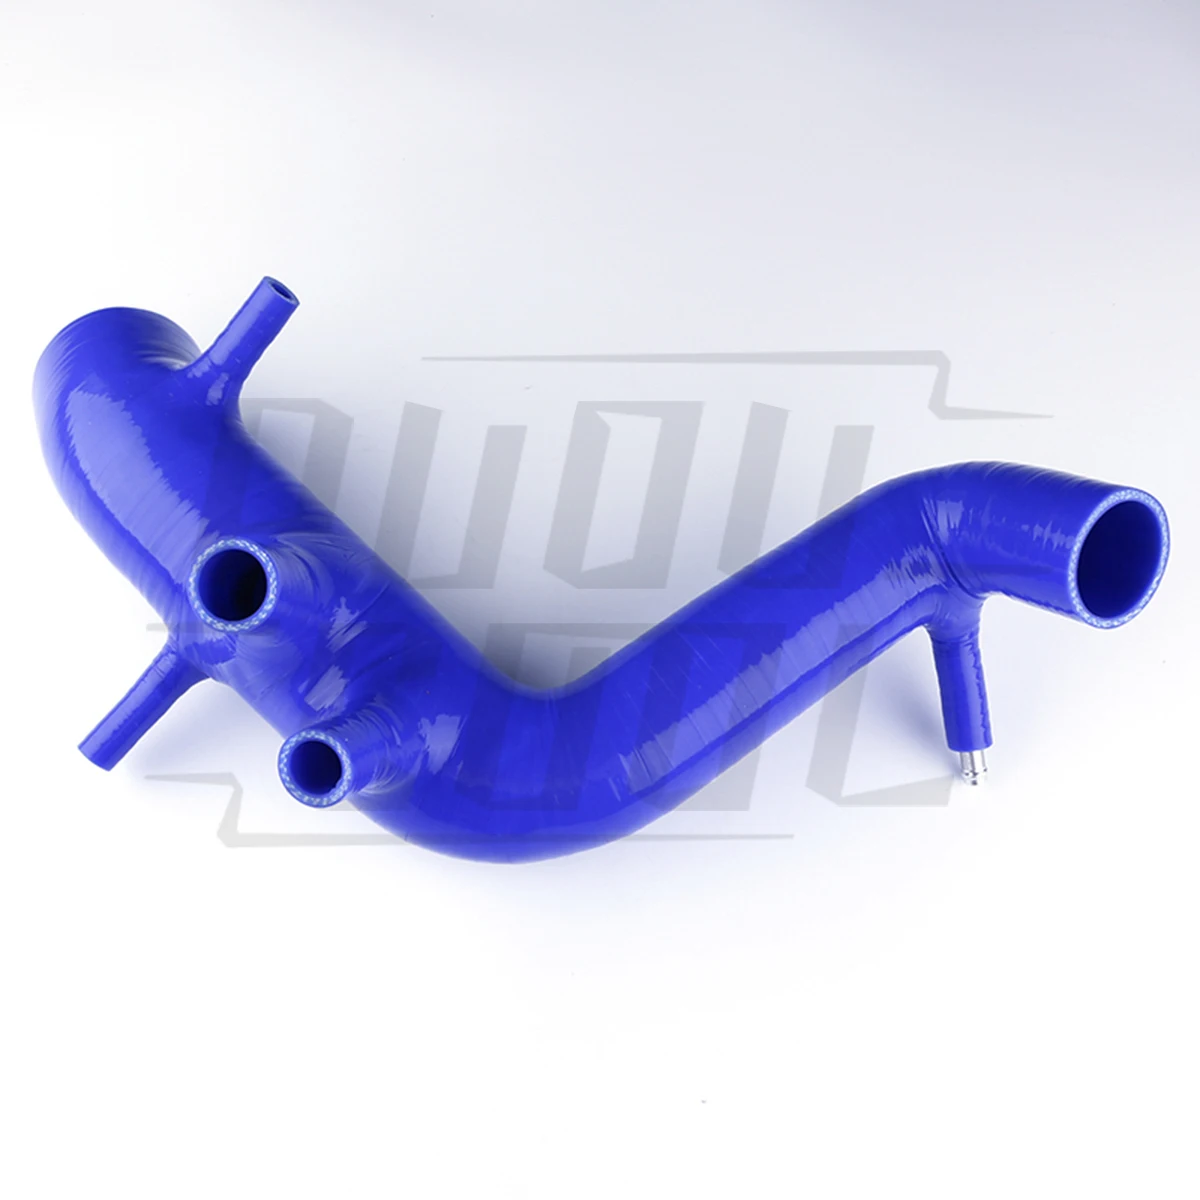 

Red/Blue Turbo Silicone Induction Intake Hose For Audi TT VW / Golf MK4 Beetle Leon A3 1.8T 1PC